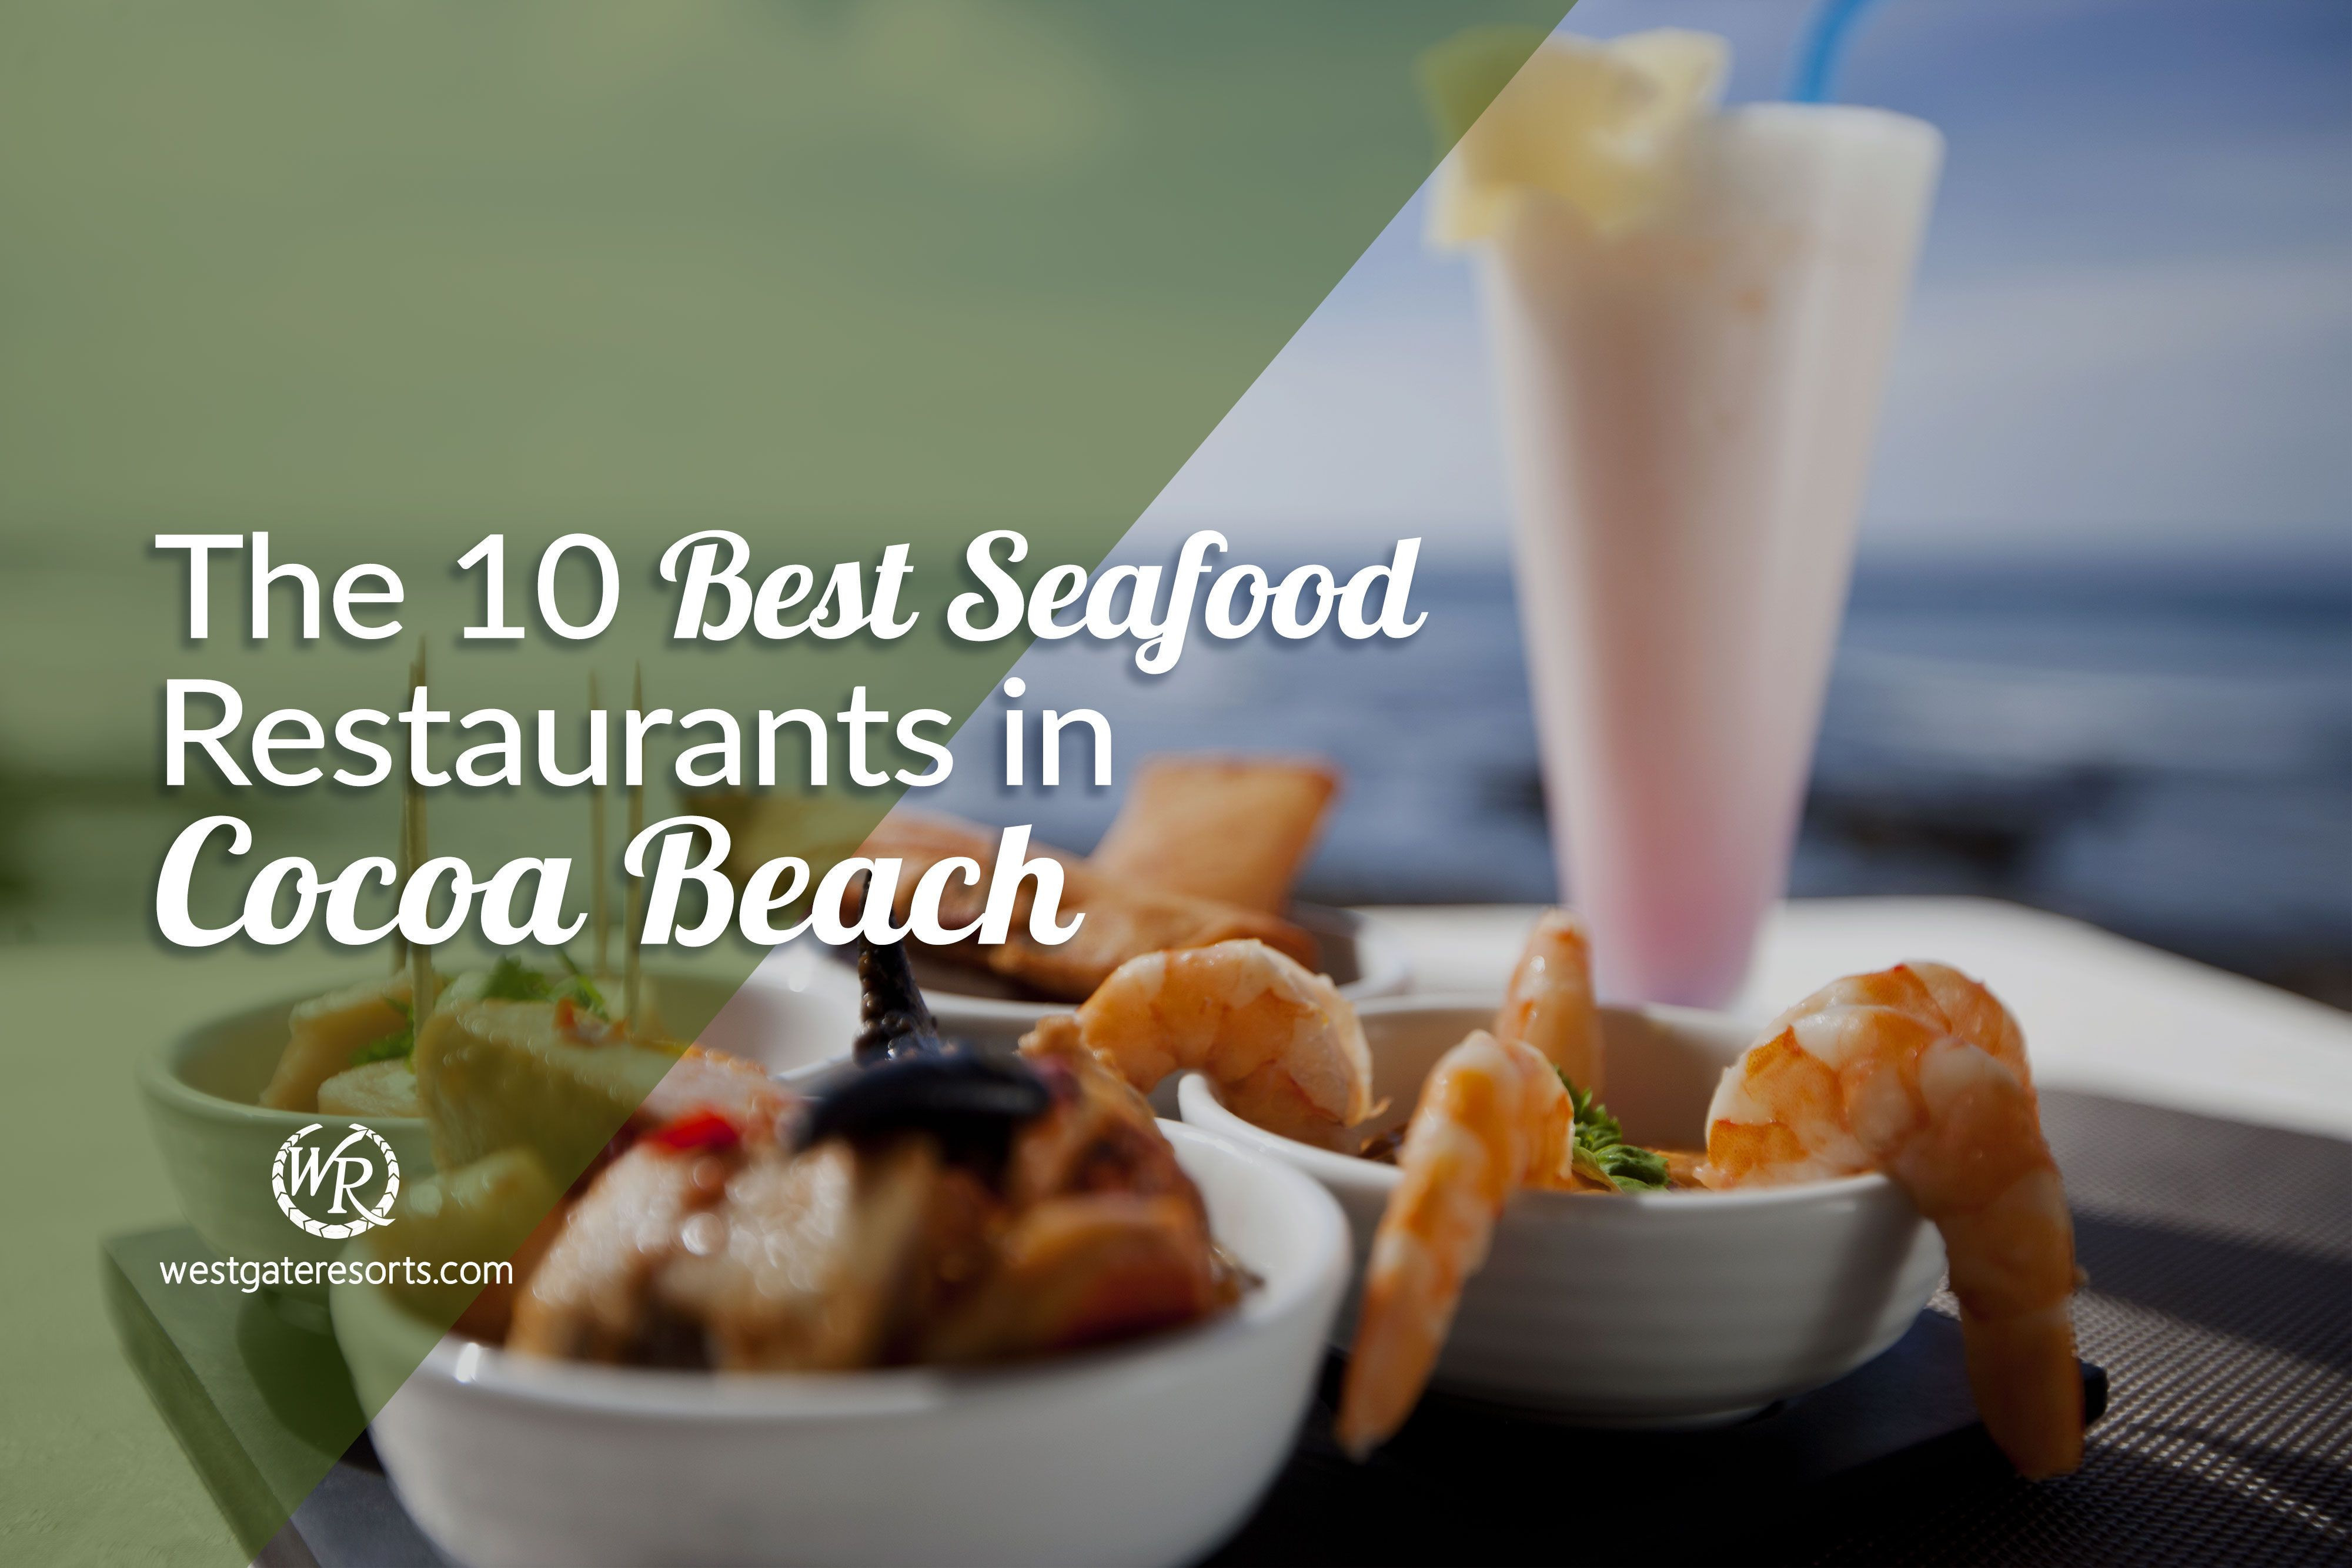 The 10 Best Seafood Restaurants in Cocoa Beach